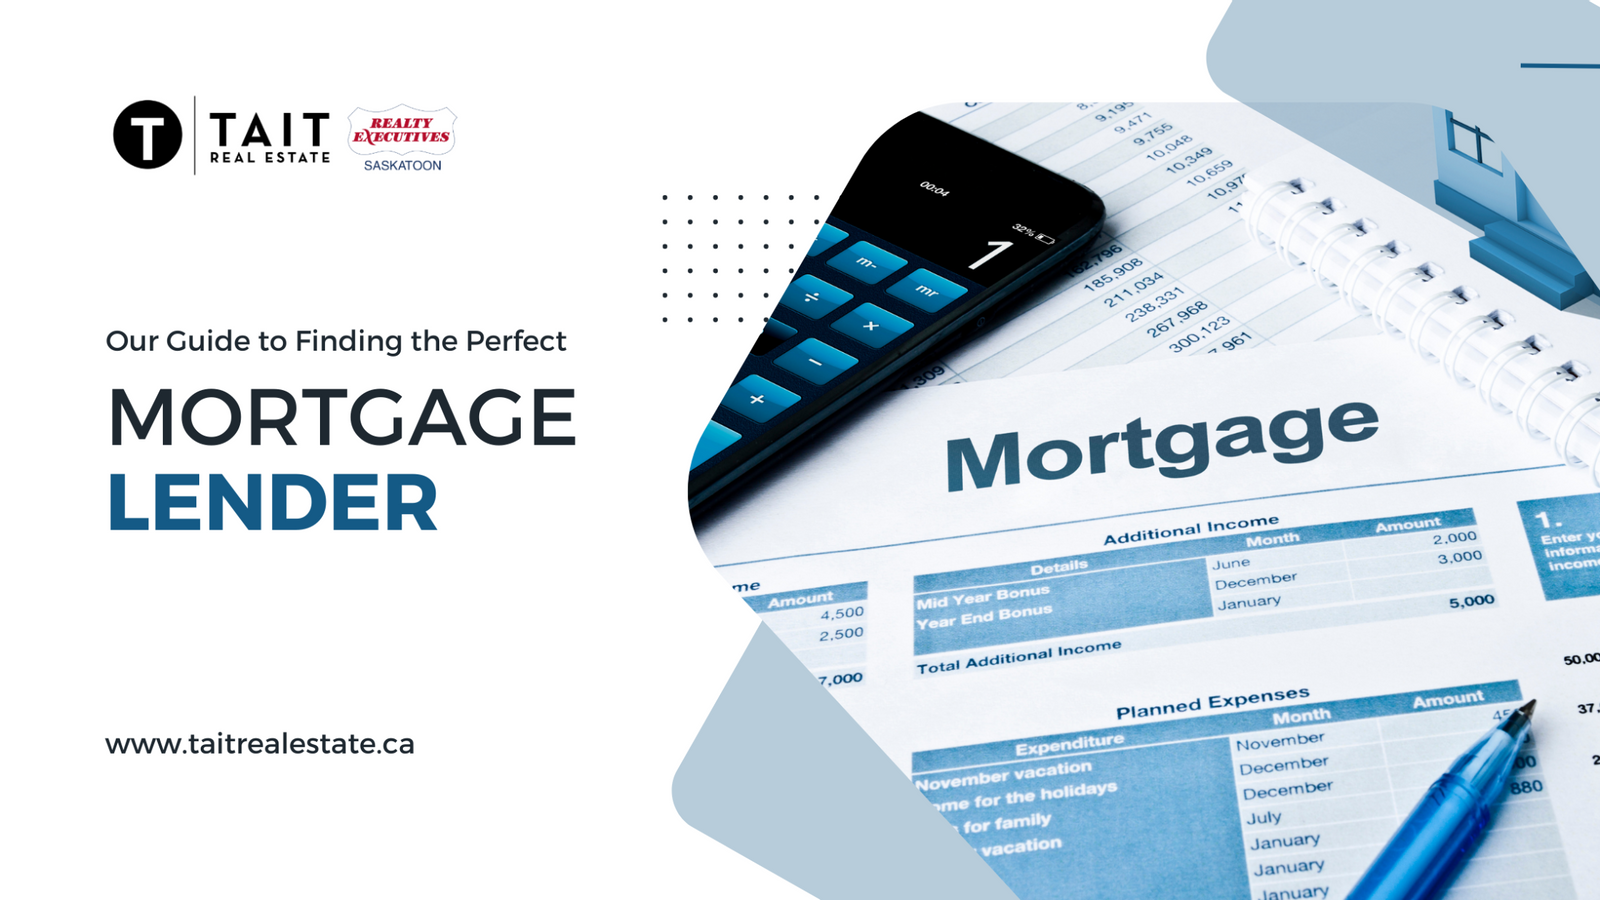 Our Guide to Finding the Perfect Mortgage Lender